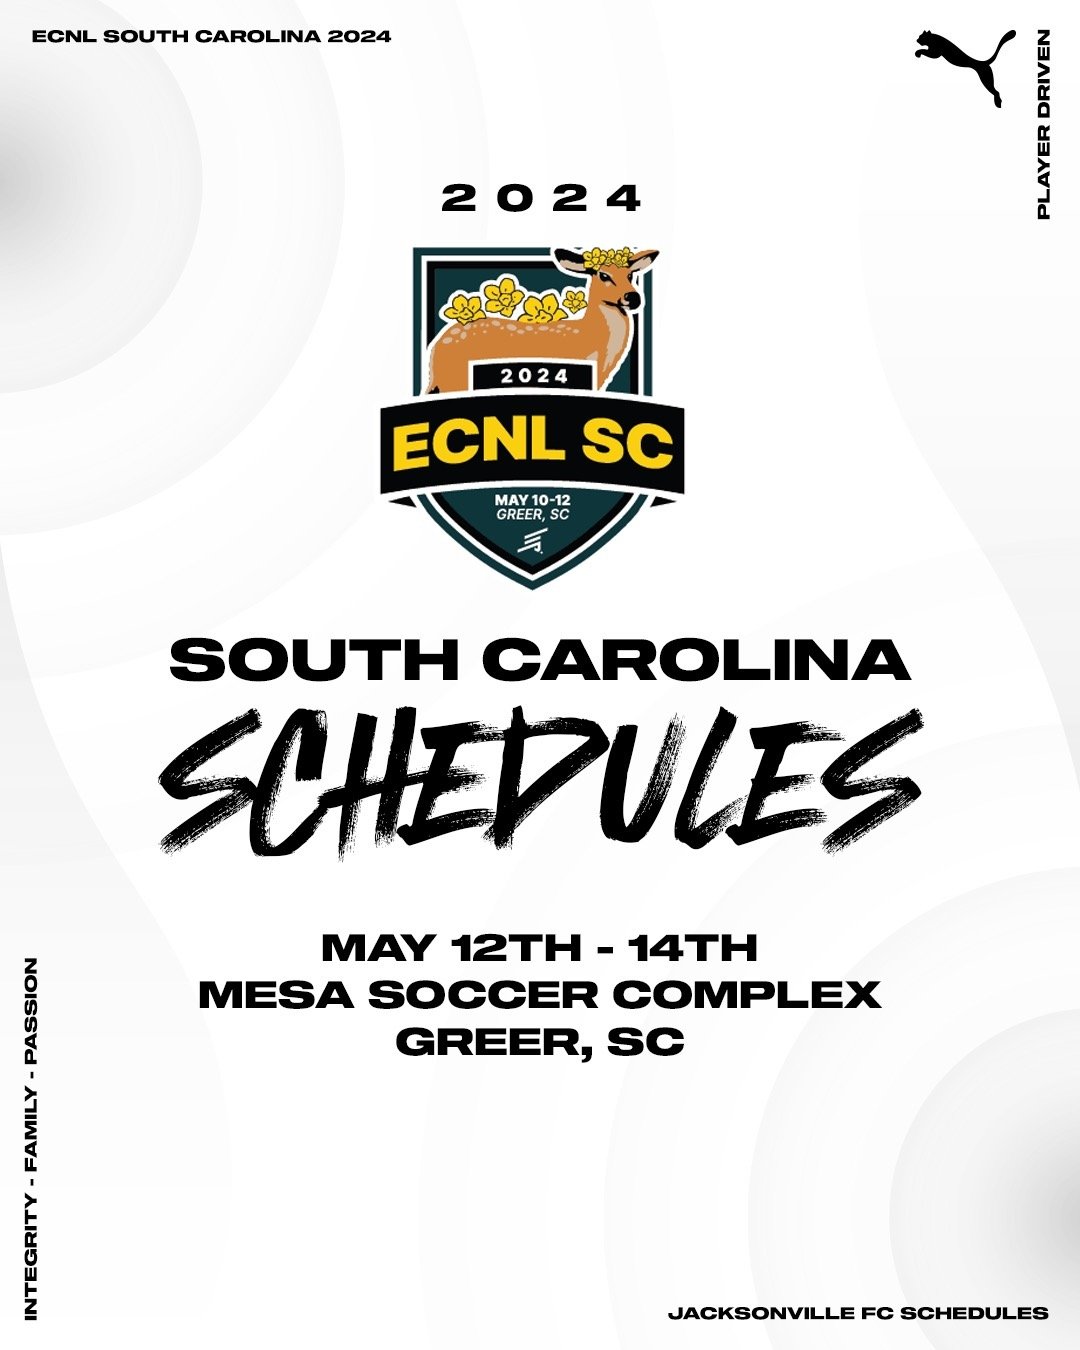 Our U12, U13, and U14 ECNL Girls are up in South Carolina this weekend competing against some tough competition from around the country. 

Good luck to all our players, coaches, and families who made the trip to Greer, SC.

Lets go JFC!!!

#PlayerDri